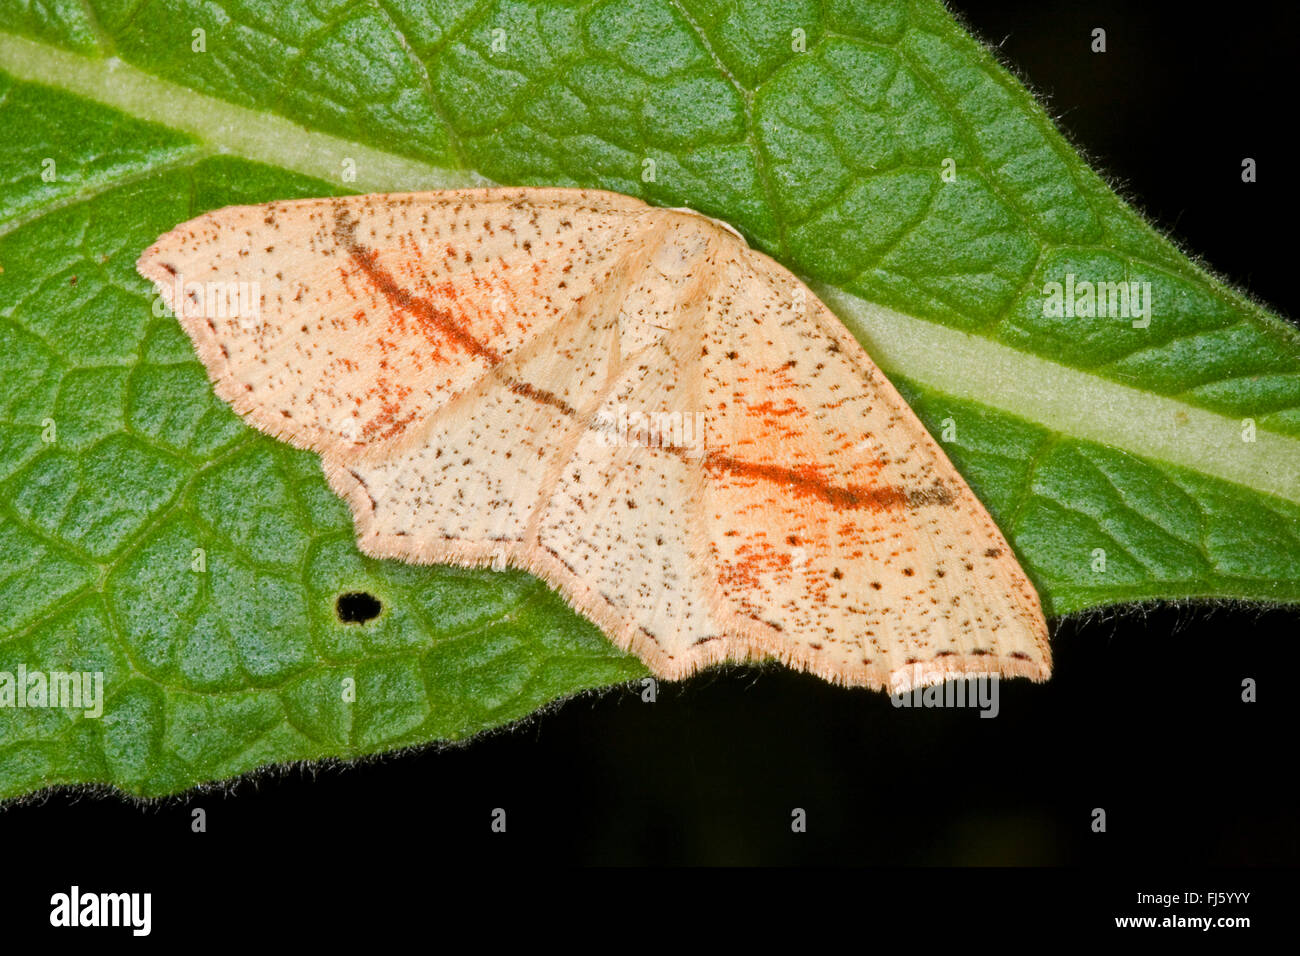 Maiden's blush moth (Cosymbia punctaria, Cyclophora punctaria), sits on a leaf, Germany Stock Photo